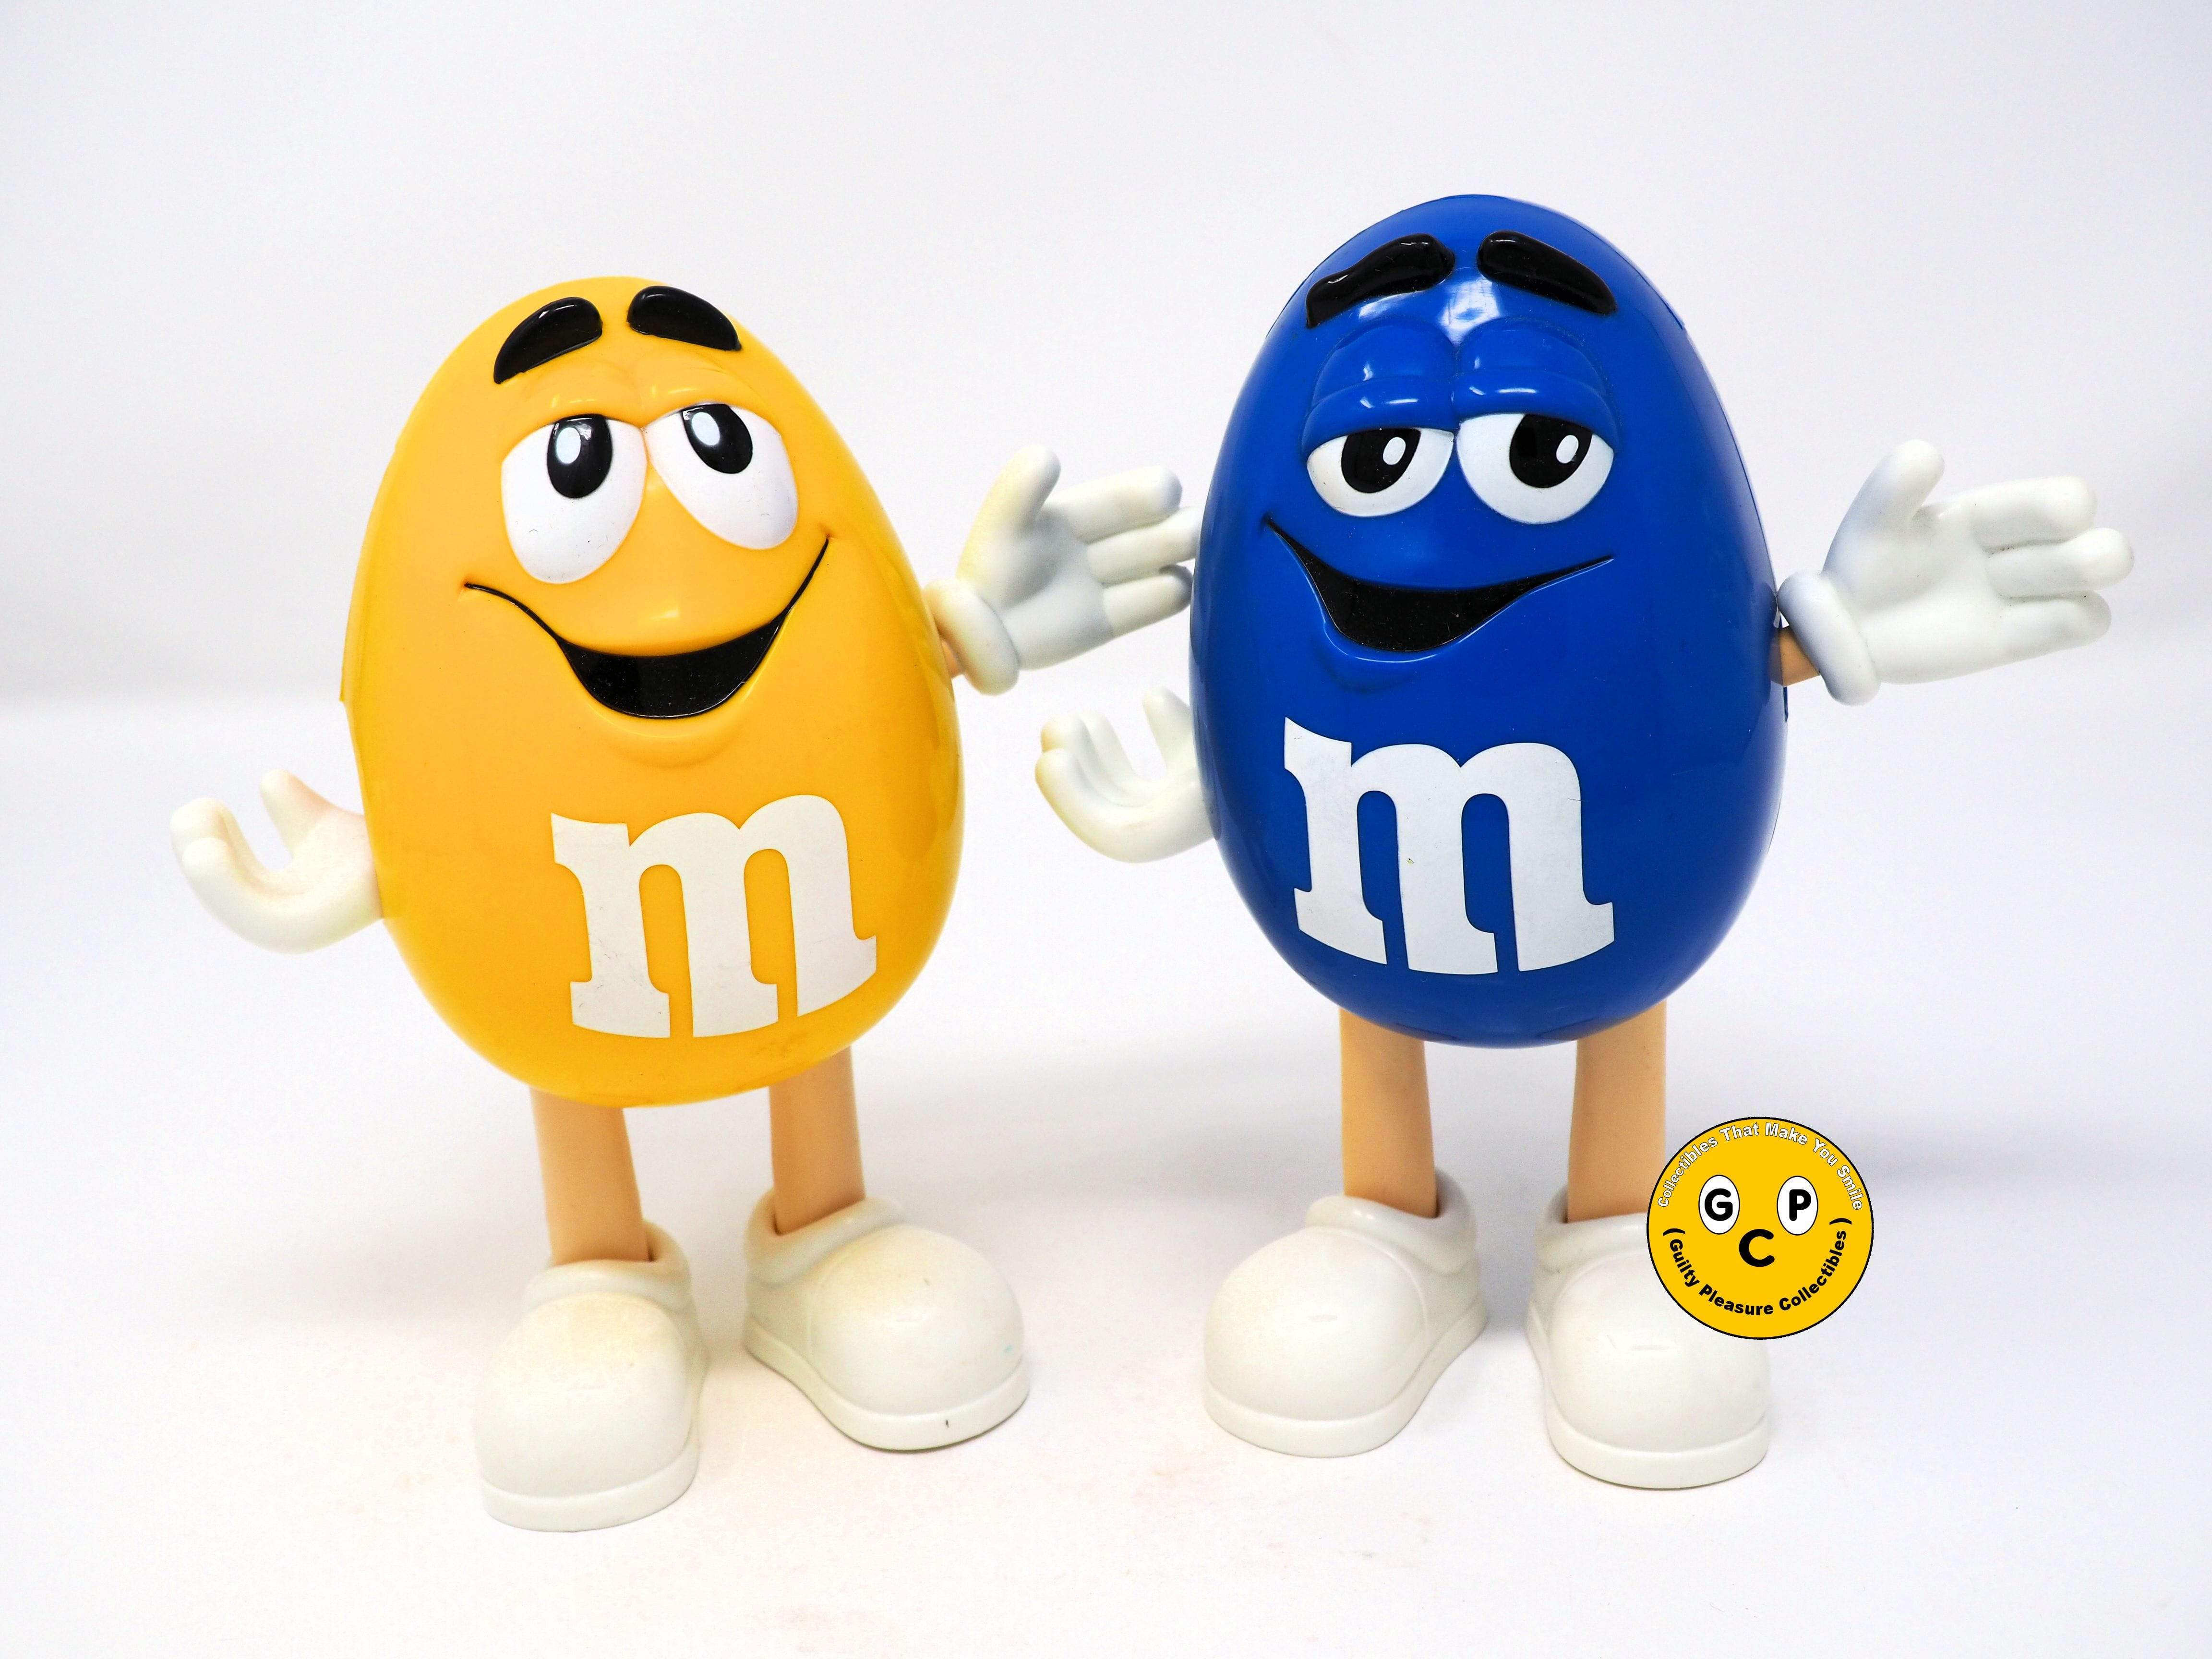 Yellow and Red M&M Candy Dispenser